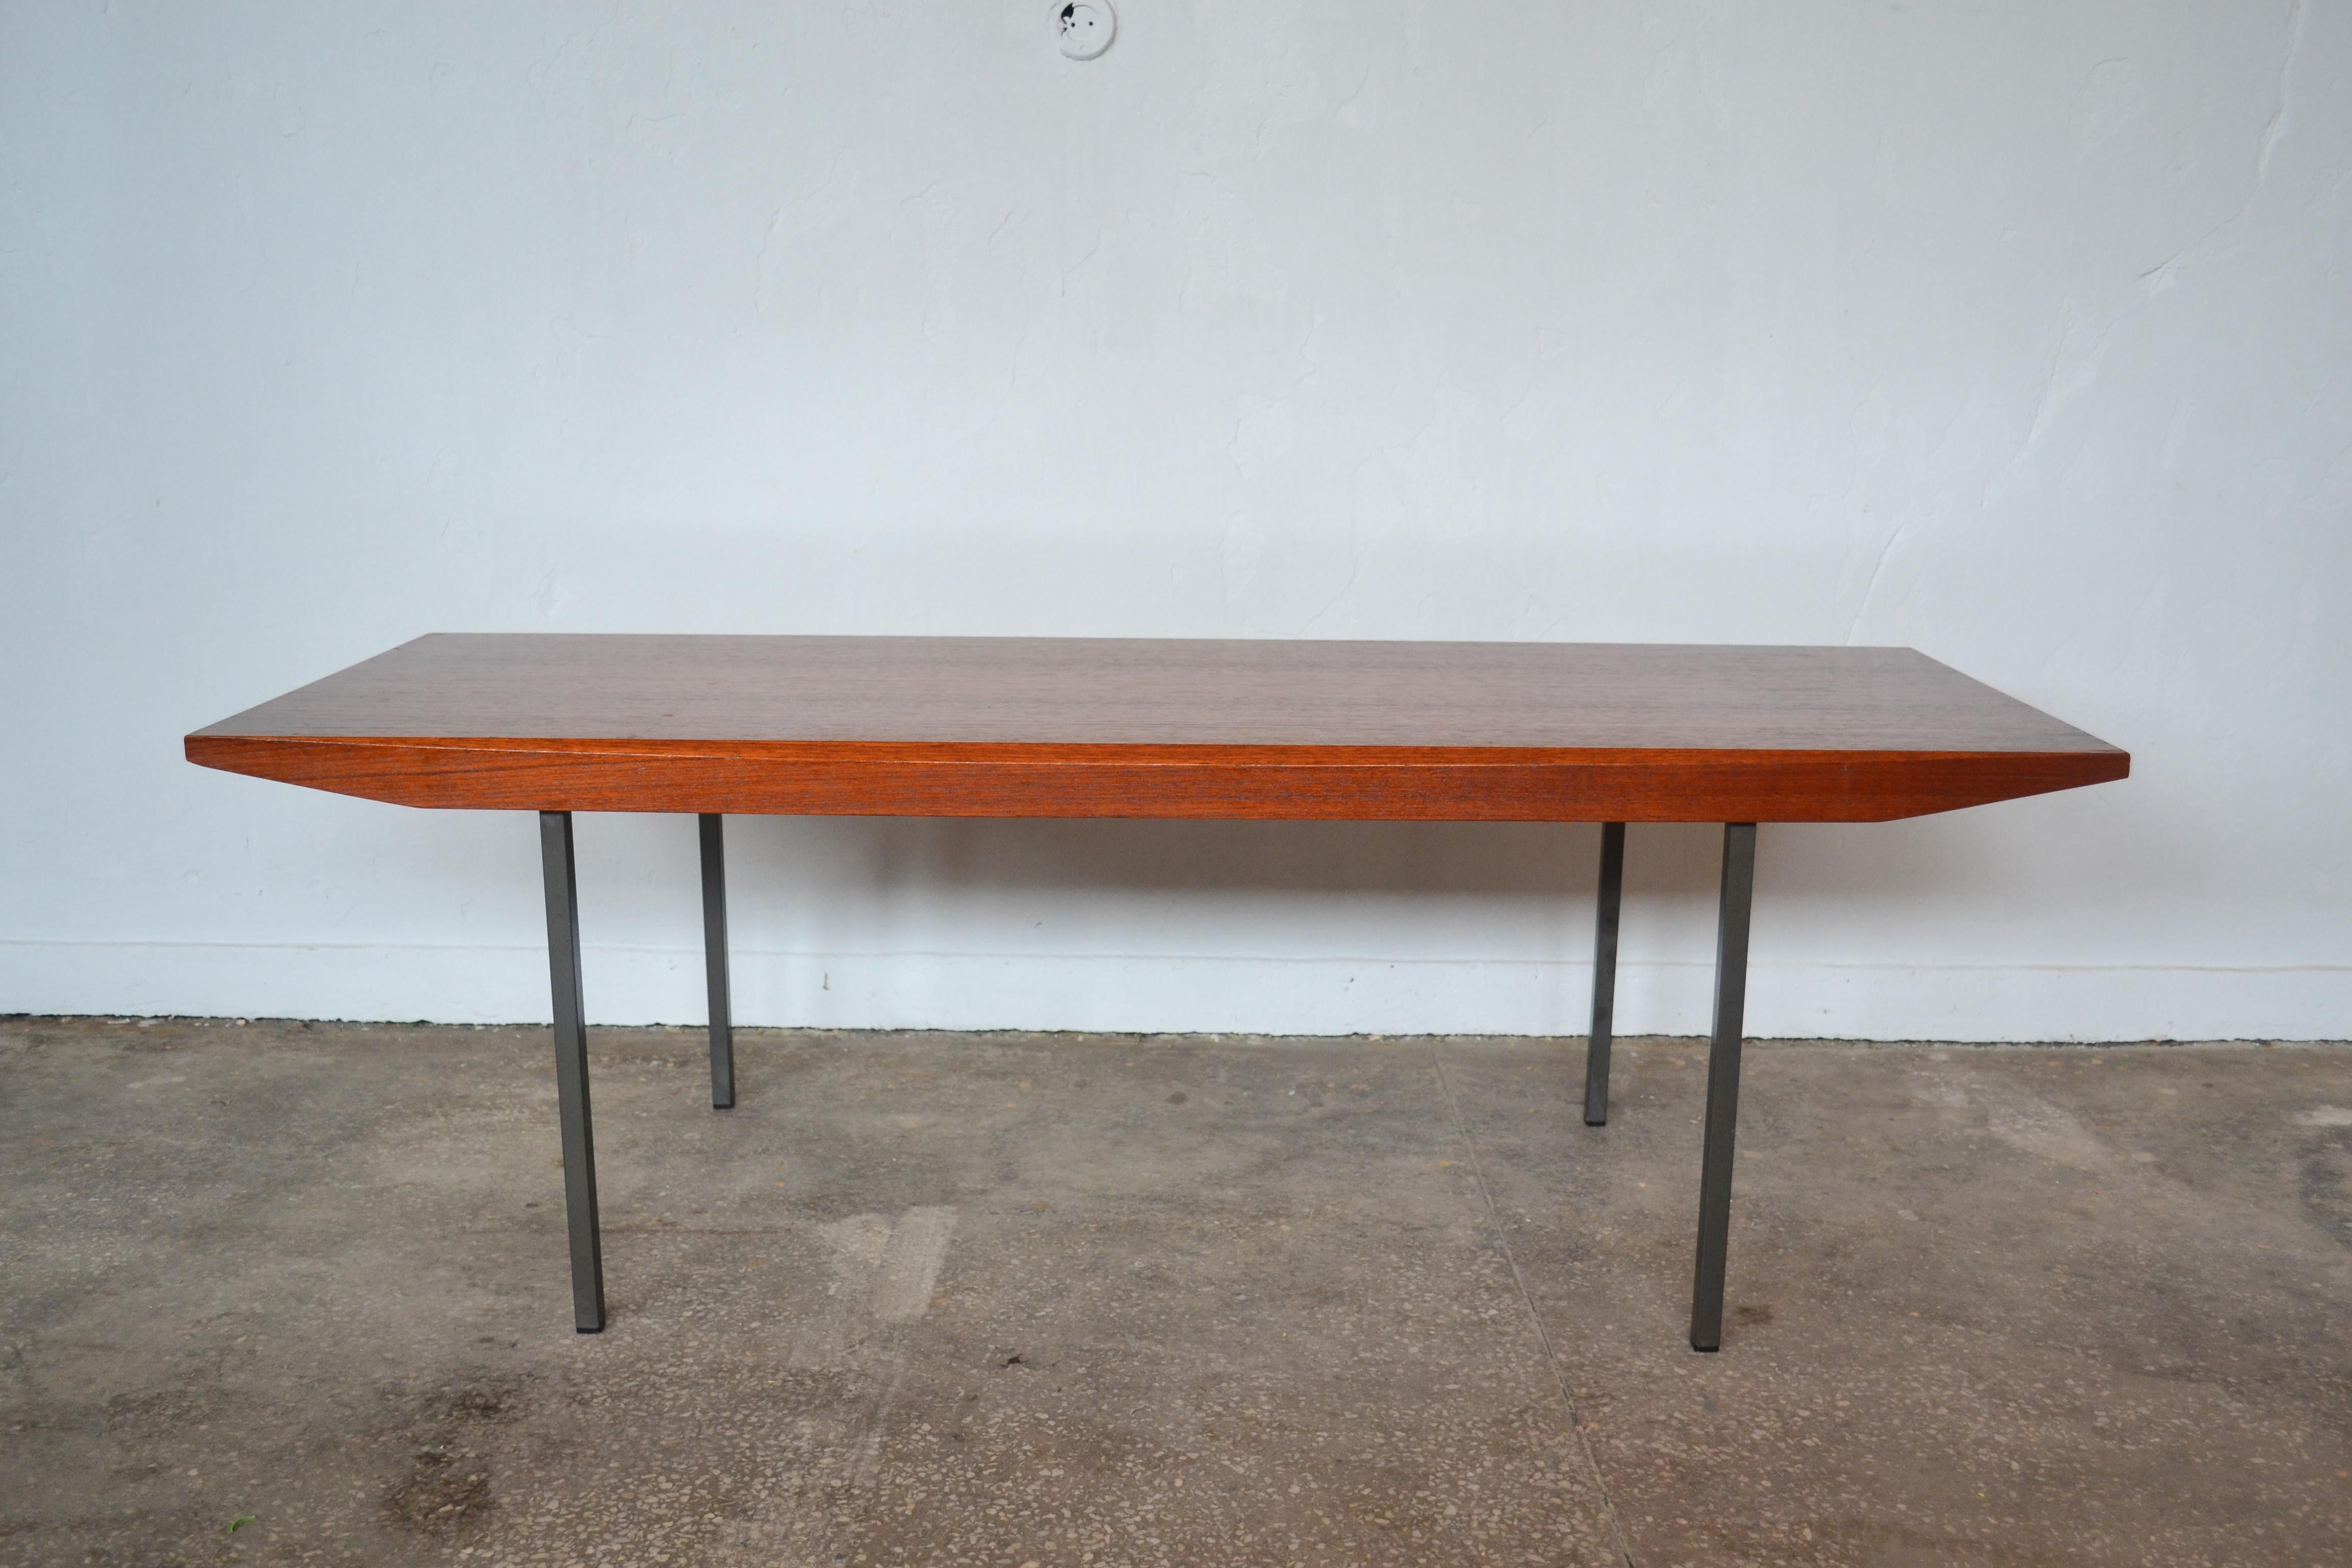 This coffee table was manufactured by Wilhelm Renz in the 1960s.